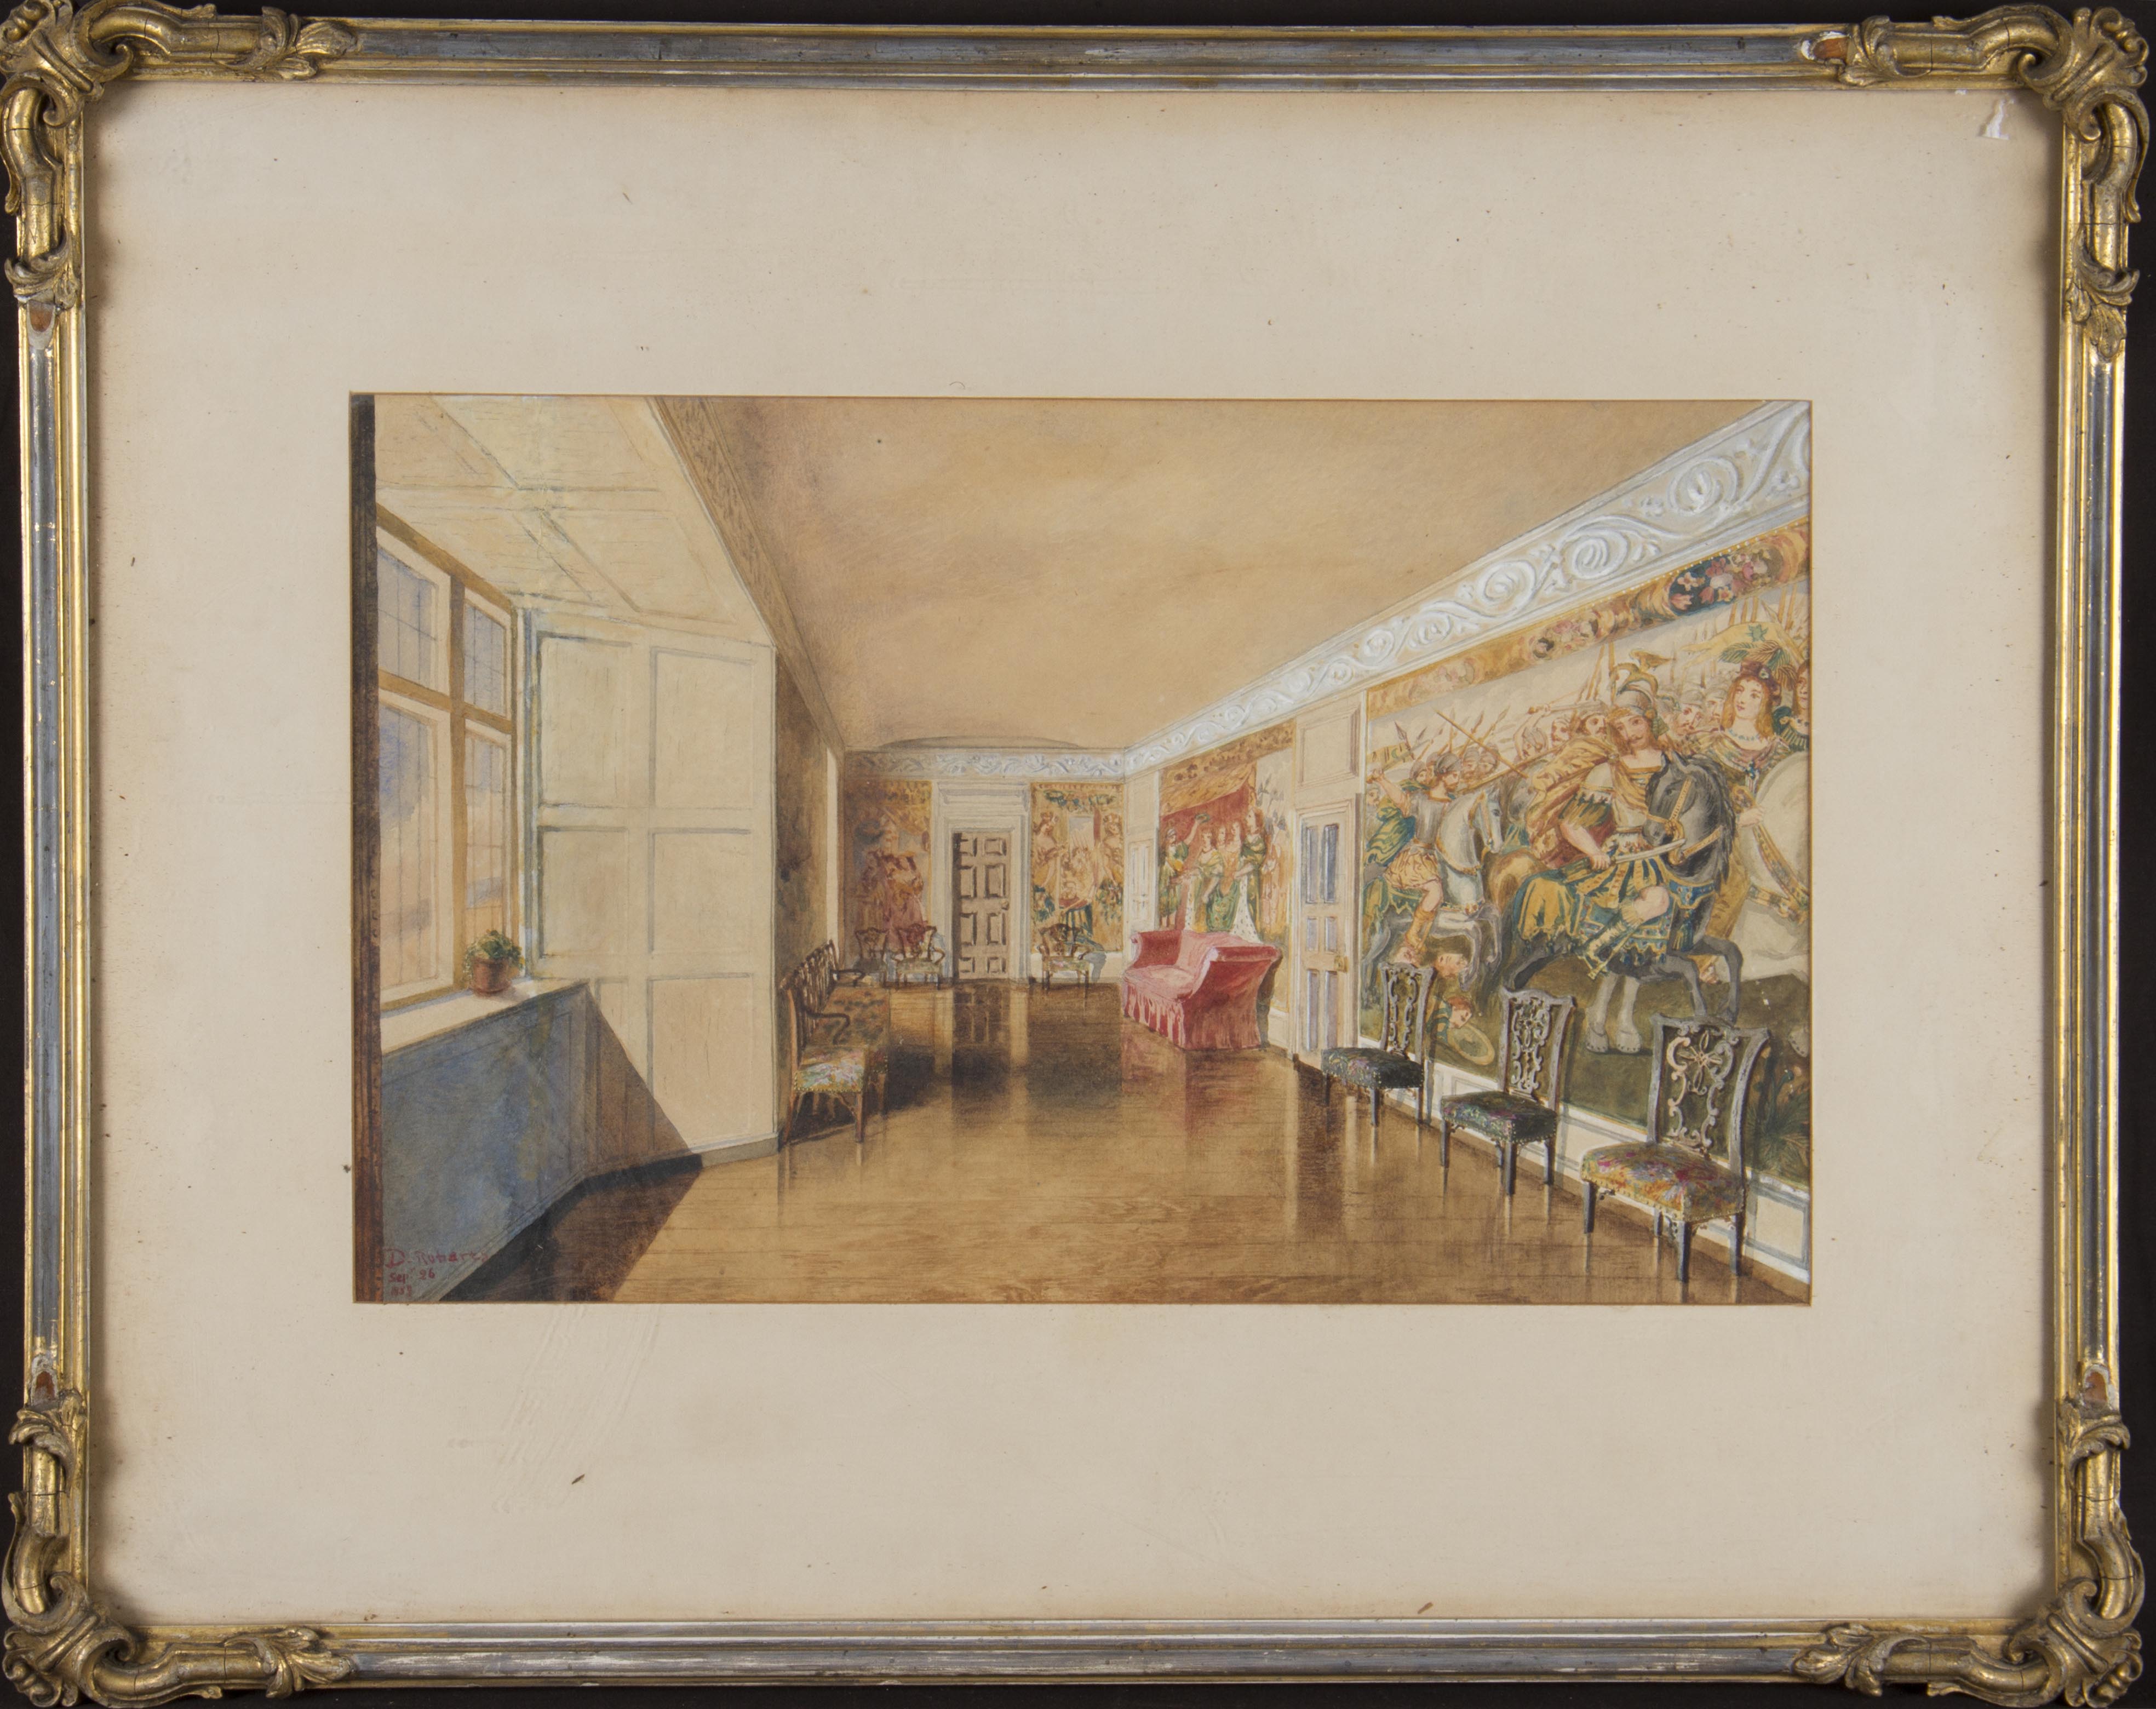 D. ROBERTS. Framed, signed, dated 'Sep 26 1853', watercolour on paper, heightened with white, room - Image 2 of 2